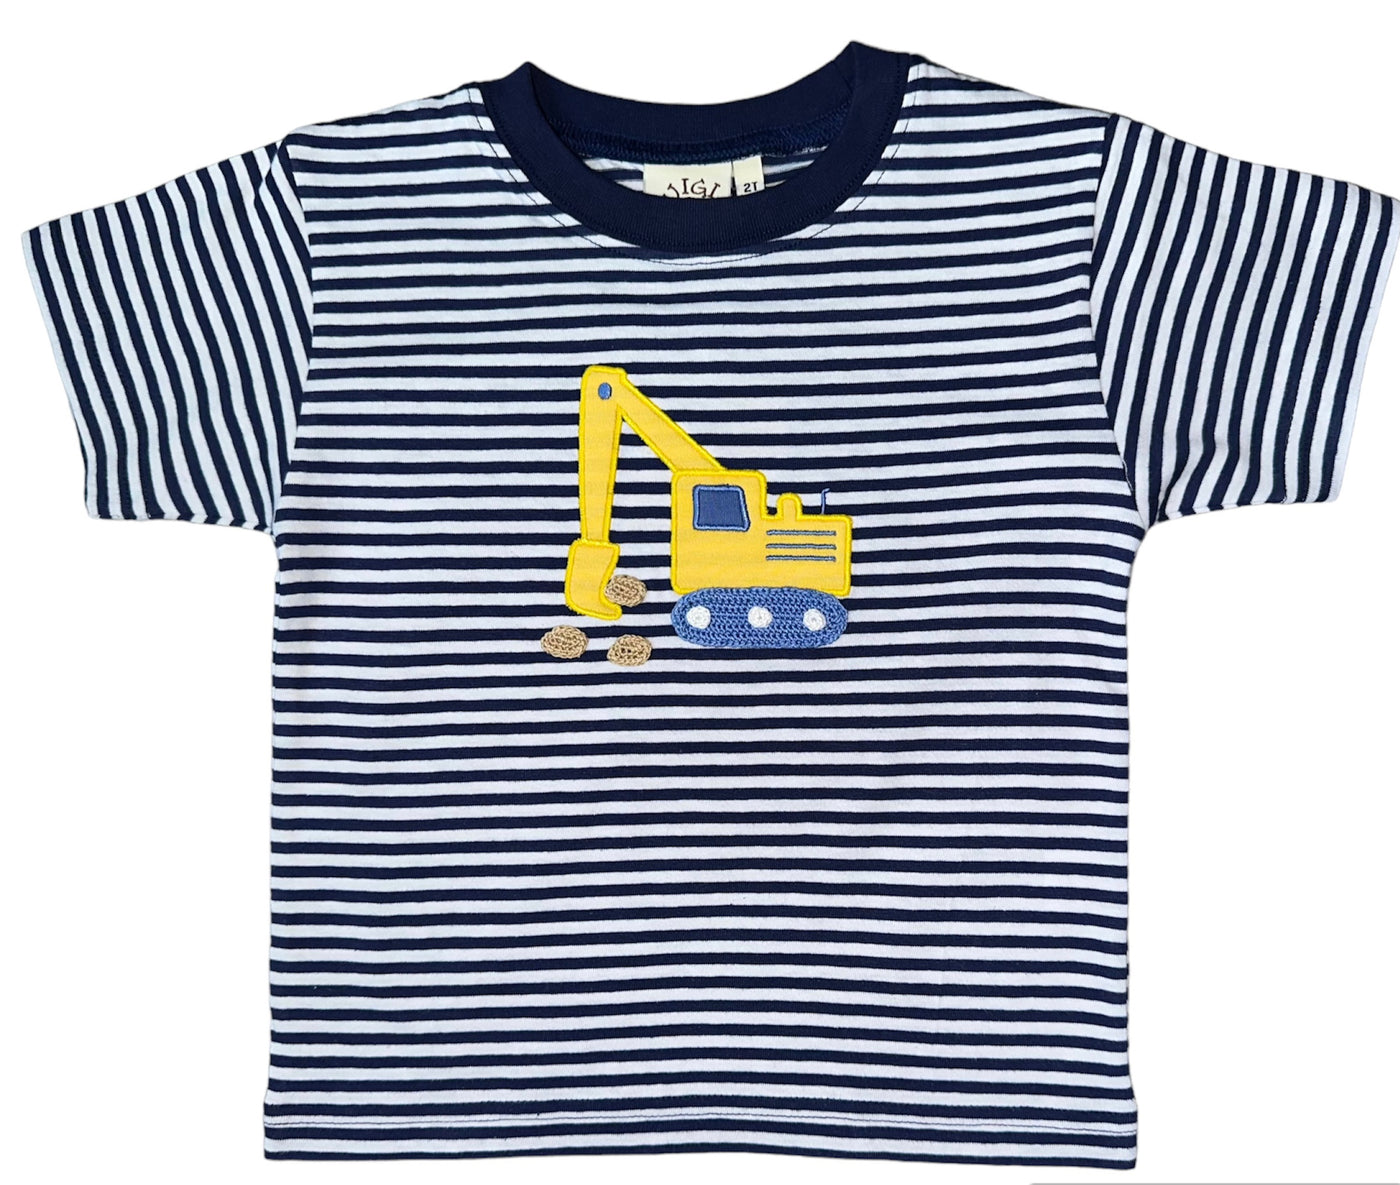 Royal and White Stripe Tee with Backhoe